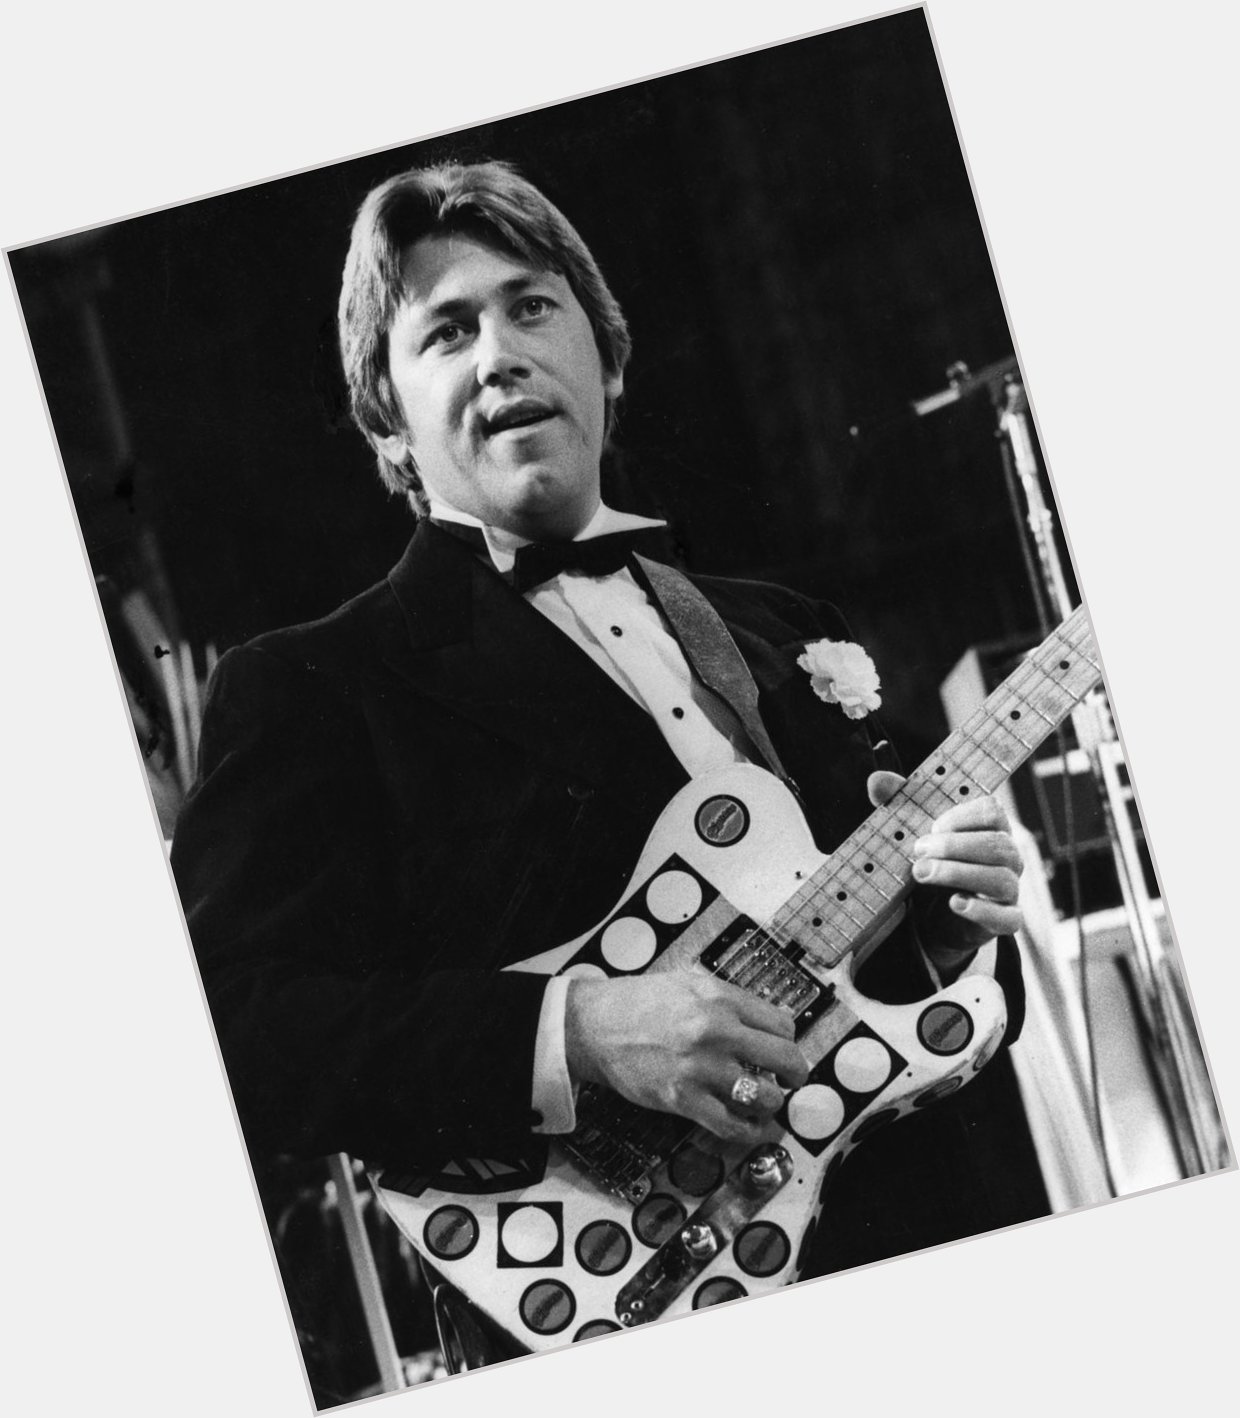 Happy Birthday up there Terry Kath 